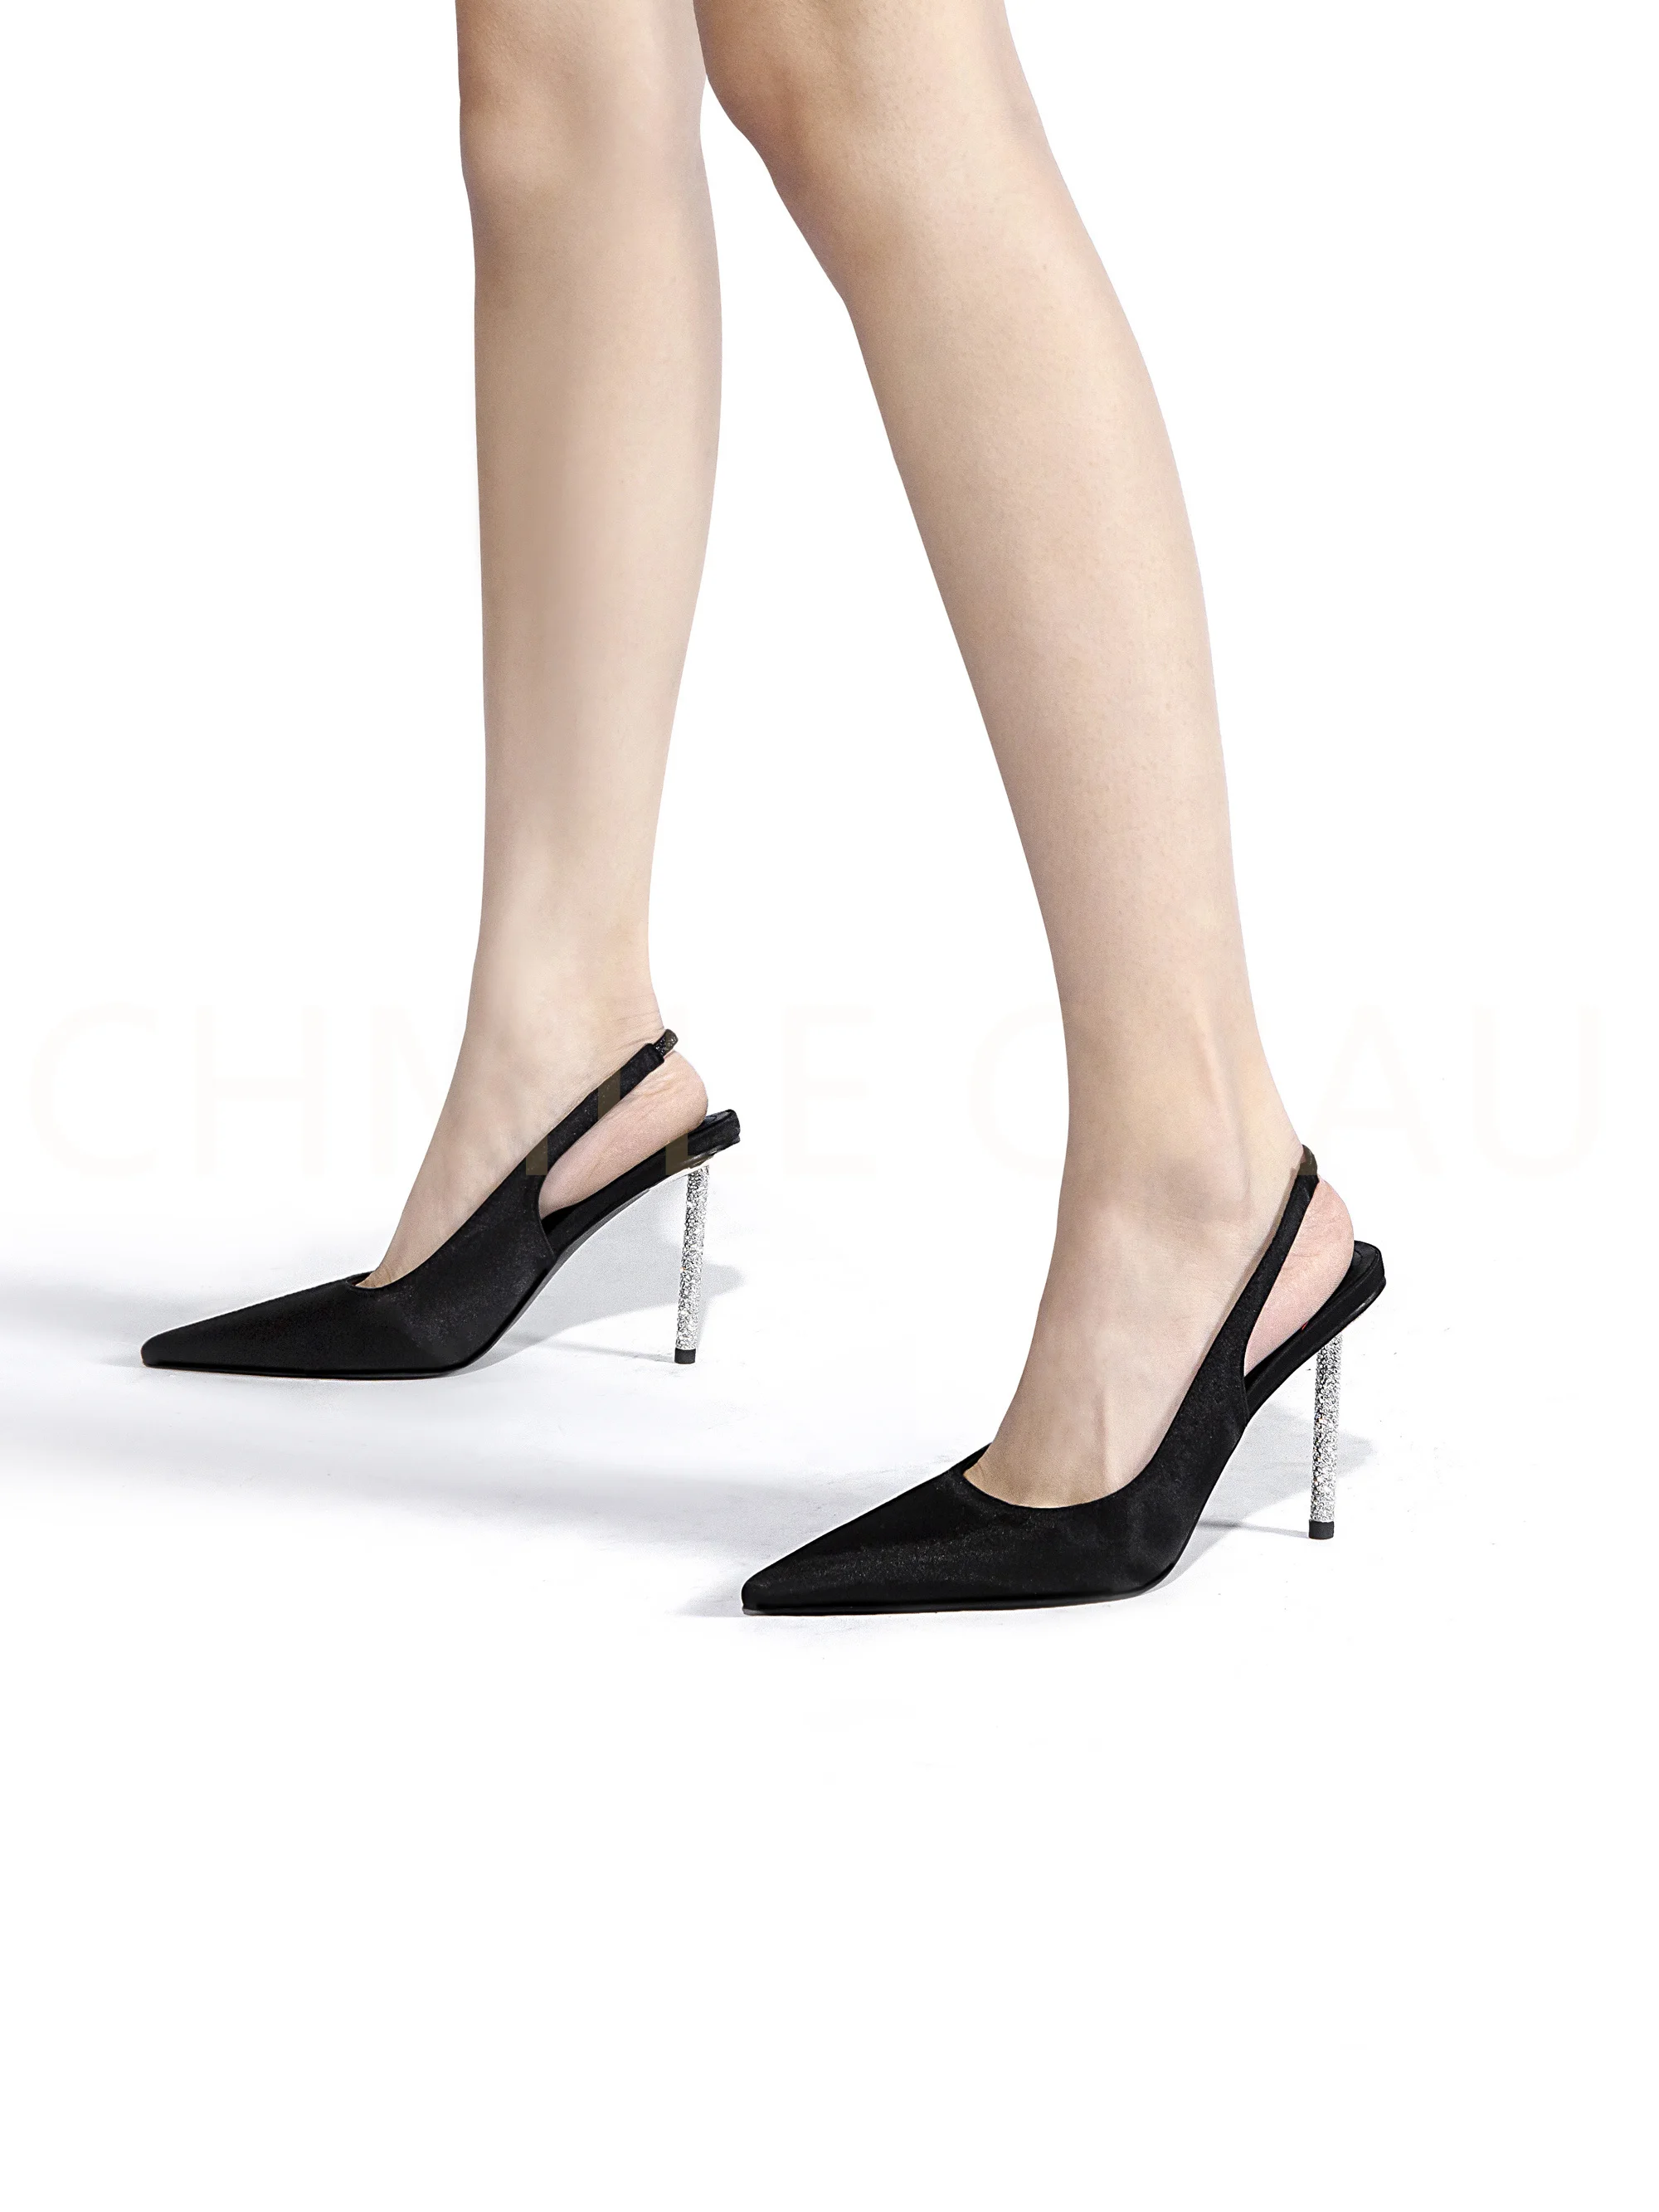 

【Measure your feet length before order】Women Stiletto Crystal High Heel Pointy Toe Sandal Sexy Banquet Prom Dress Shoe 14-CHC-33